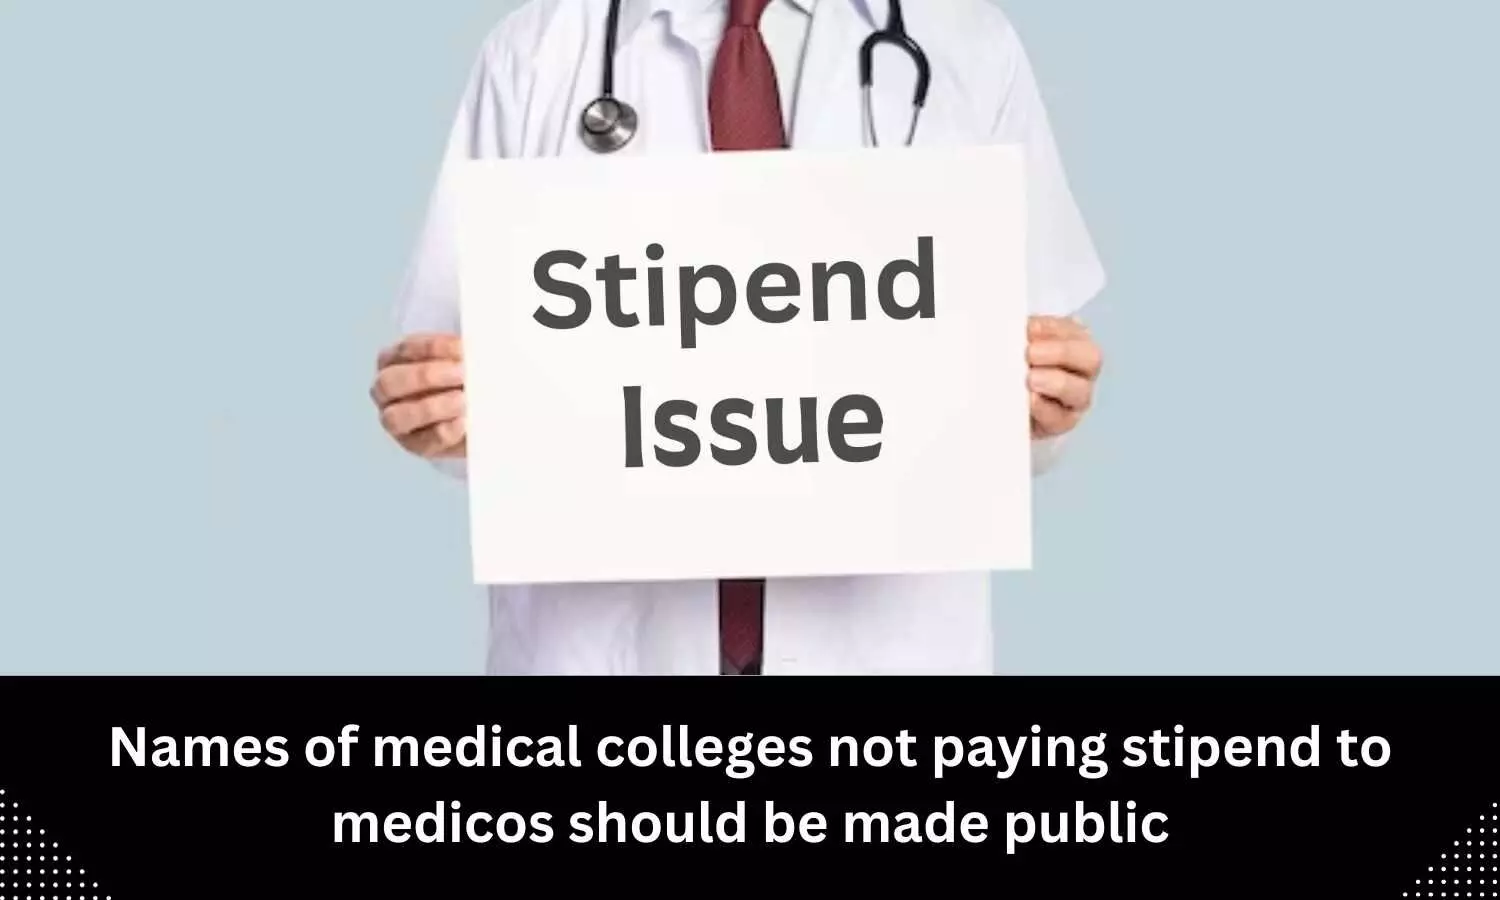 Names of medical colleges not paying stipend to medicos should be made public: Doctor activist takes on NMC